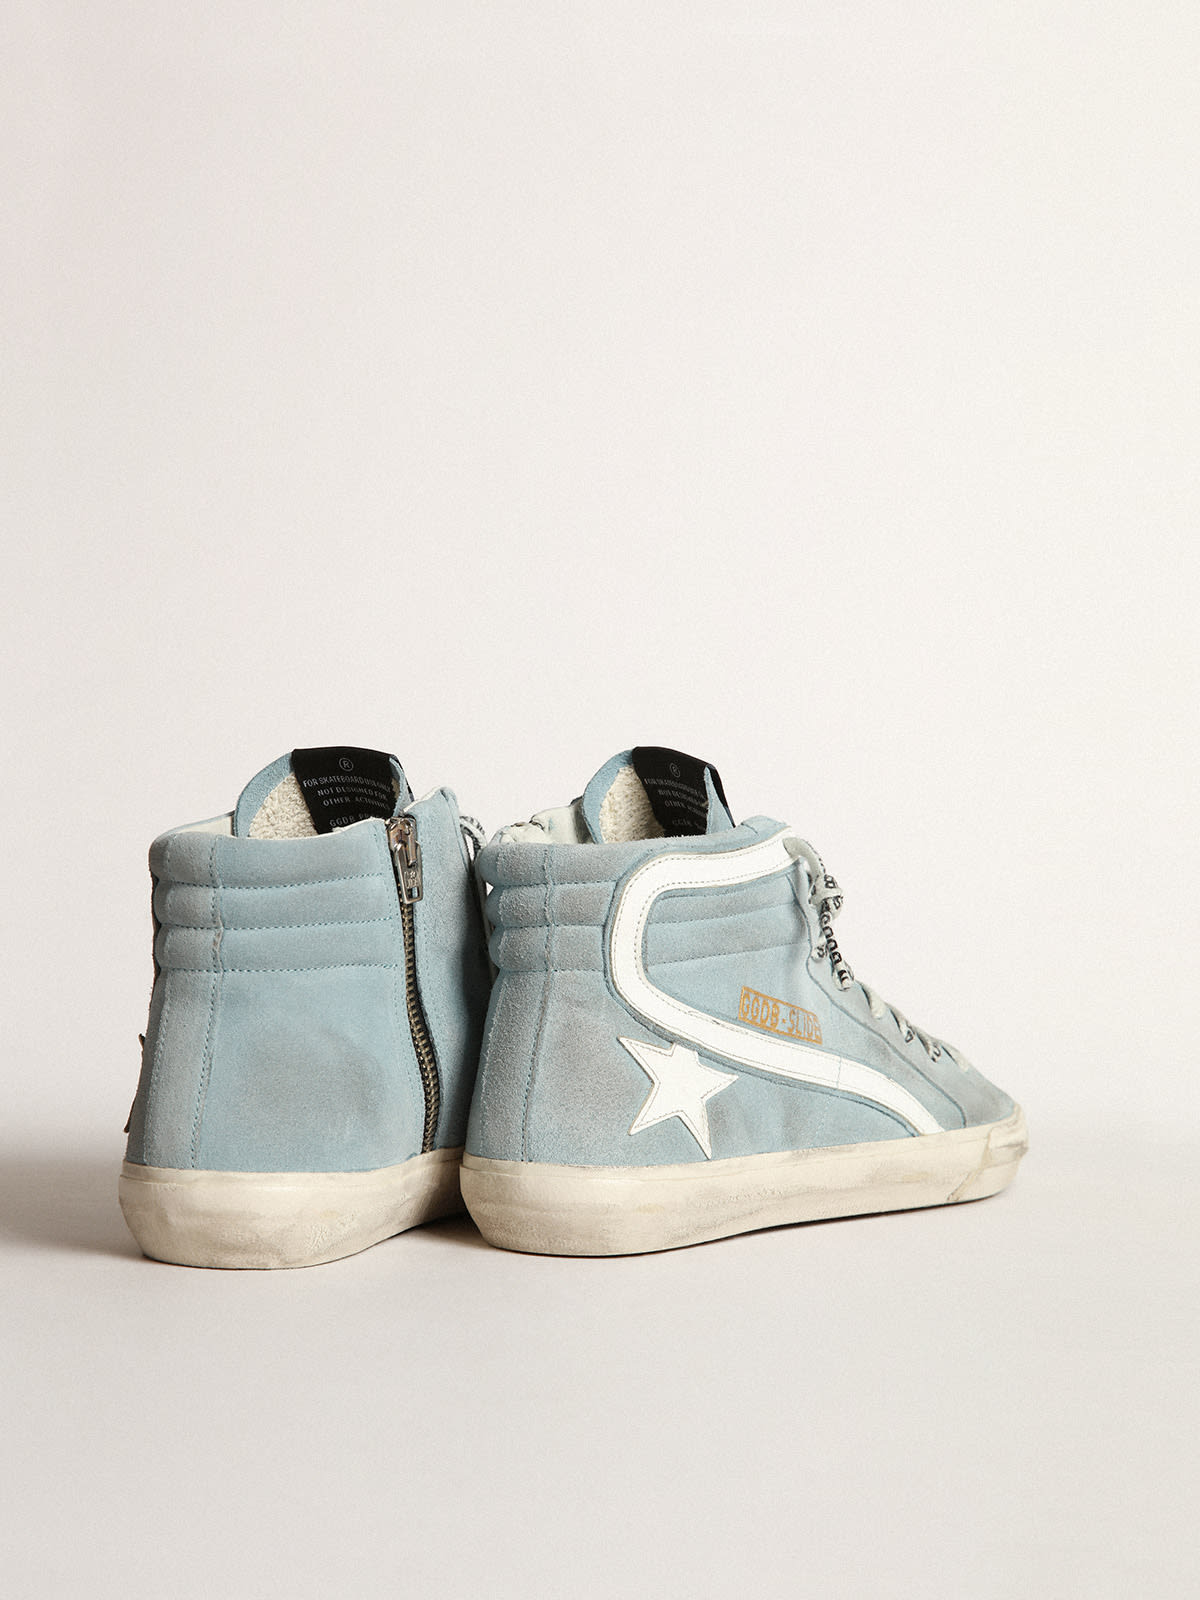 Golden Goose - Slide sneakers in suede with leather star in 